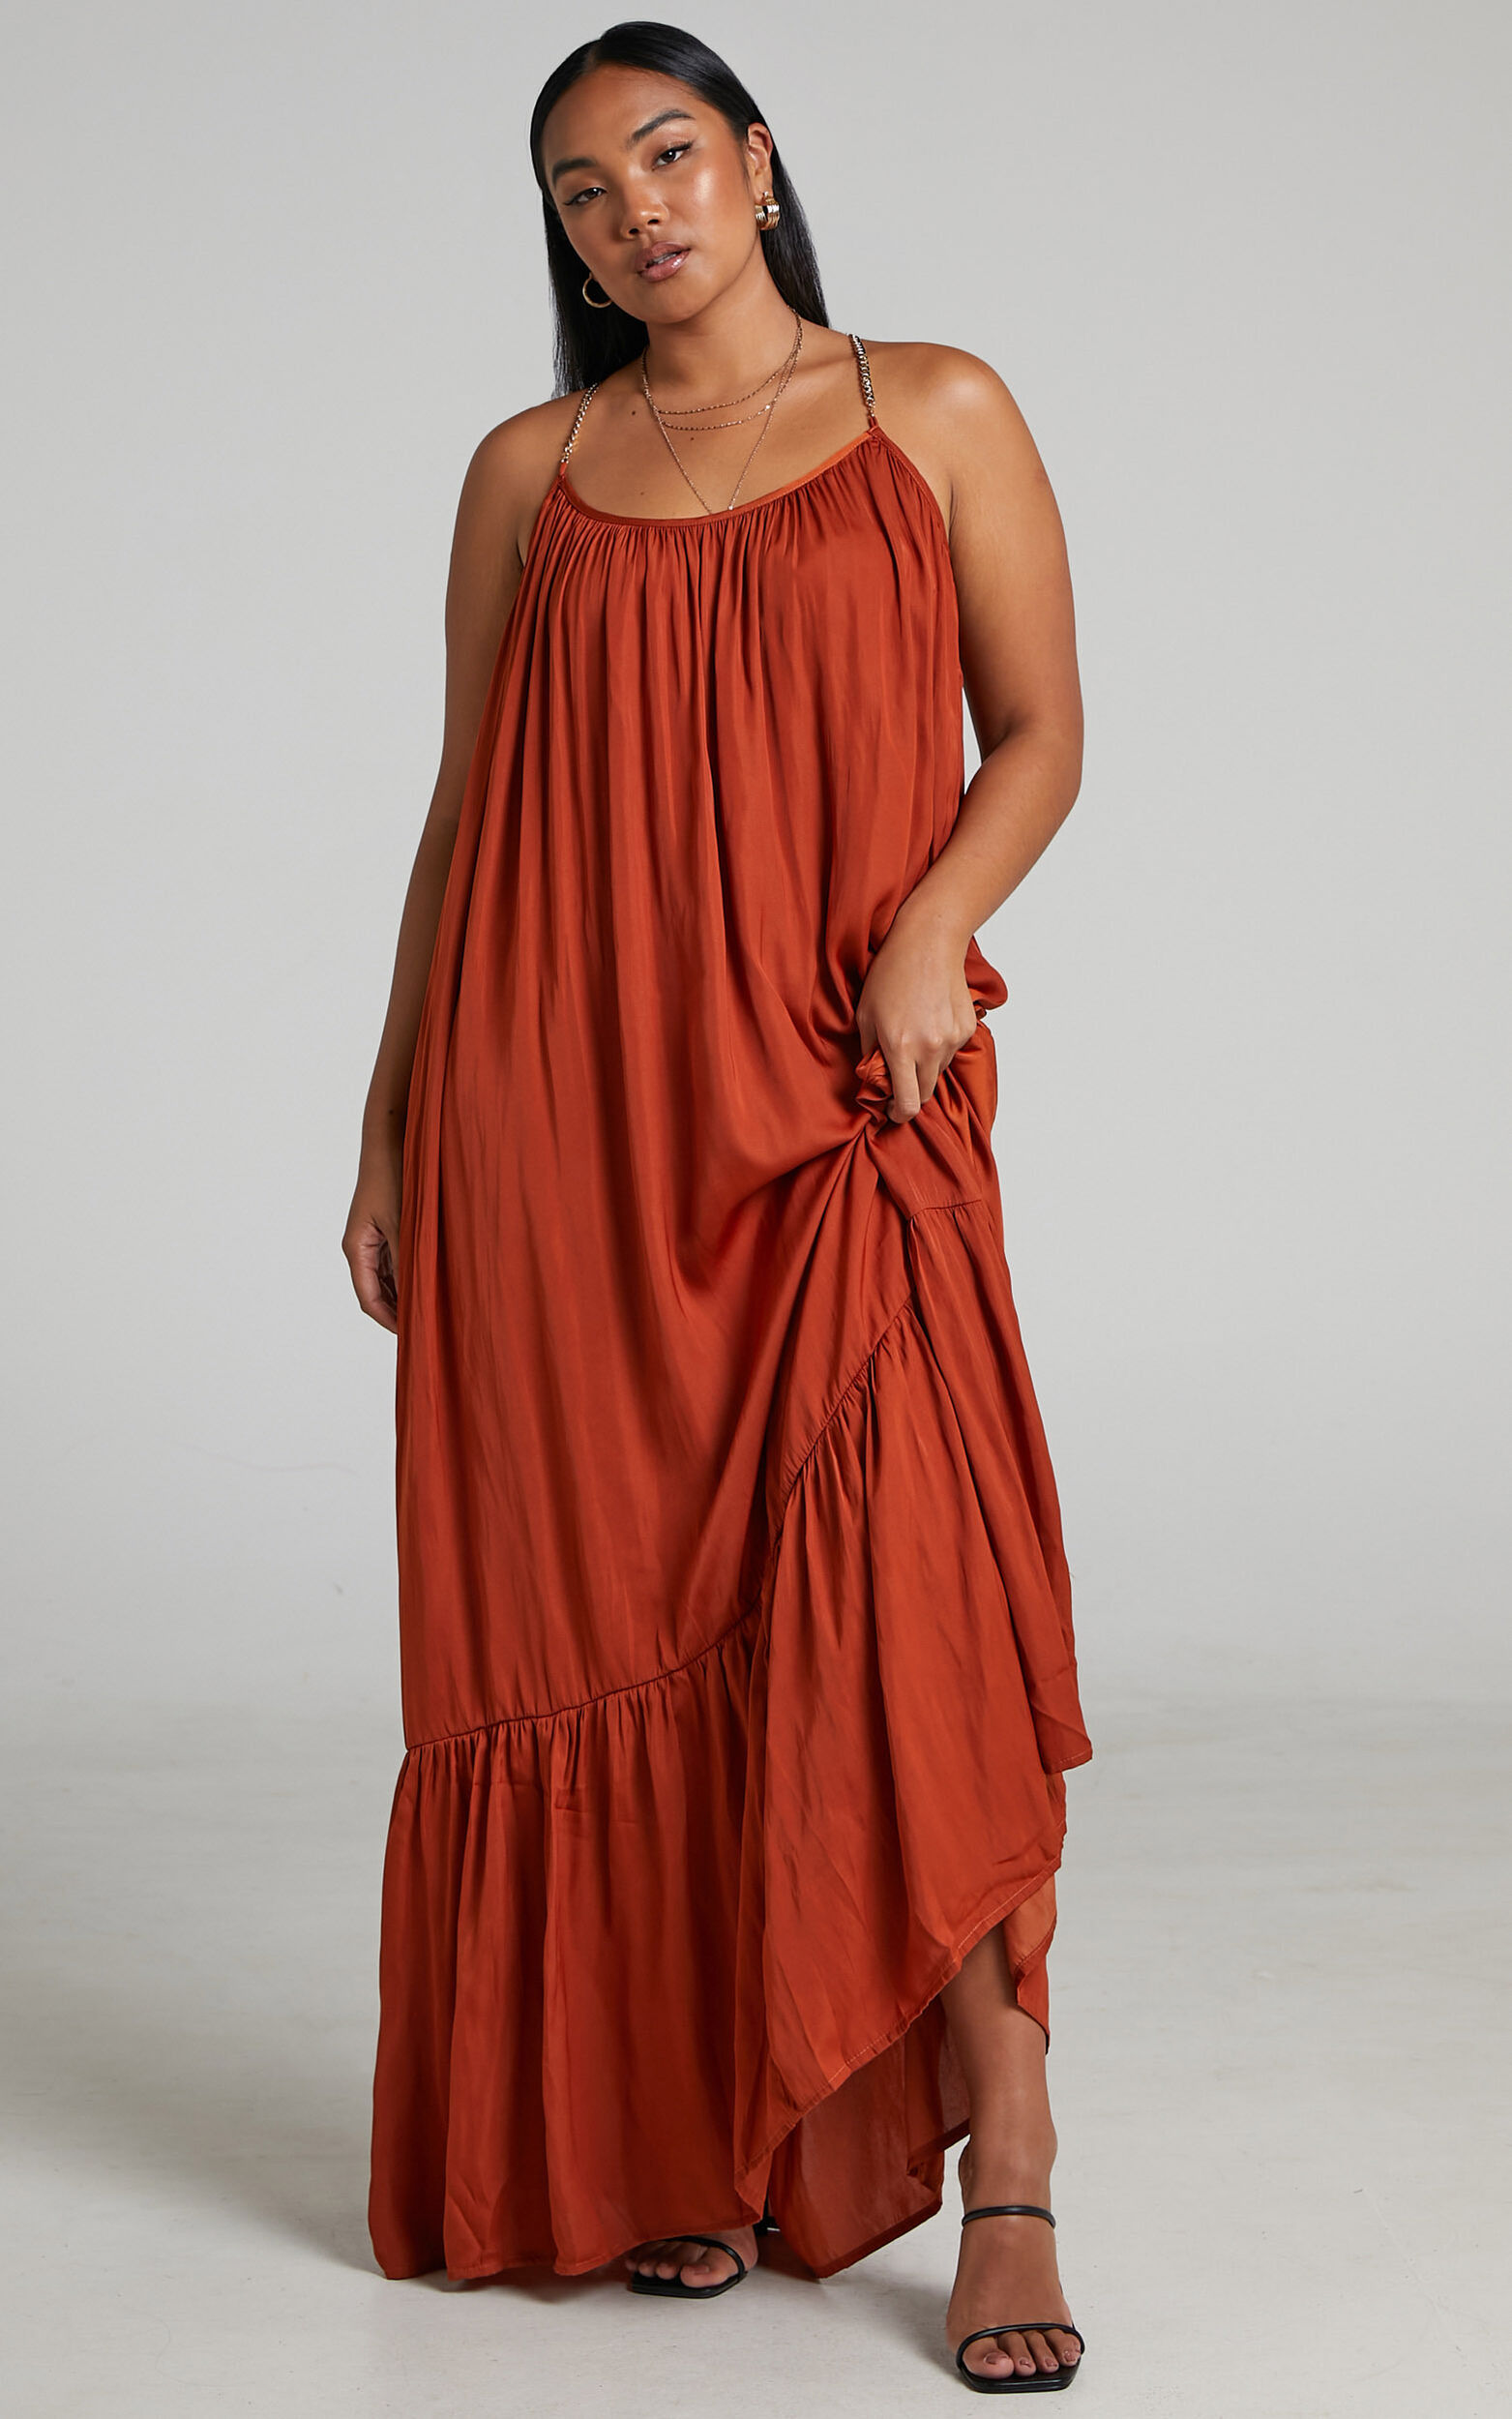 Sychie Maxi Dress - Chain Straps Relaxed Dress in Rust - 06, BRN2